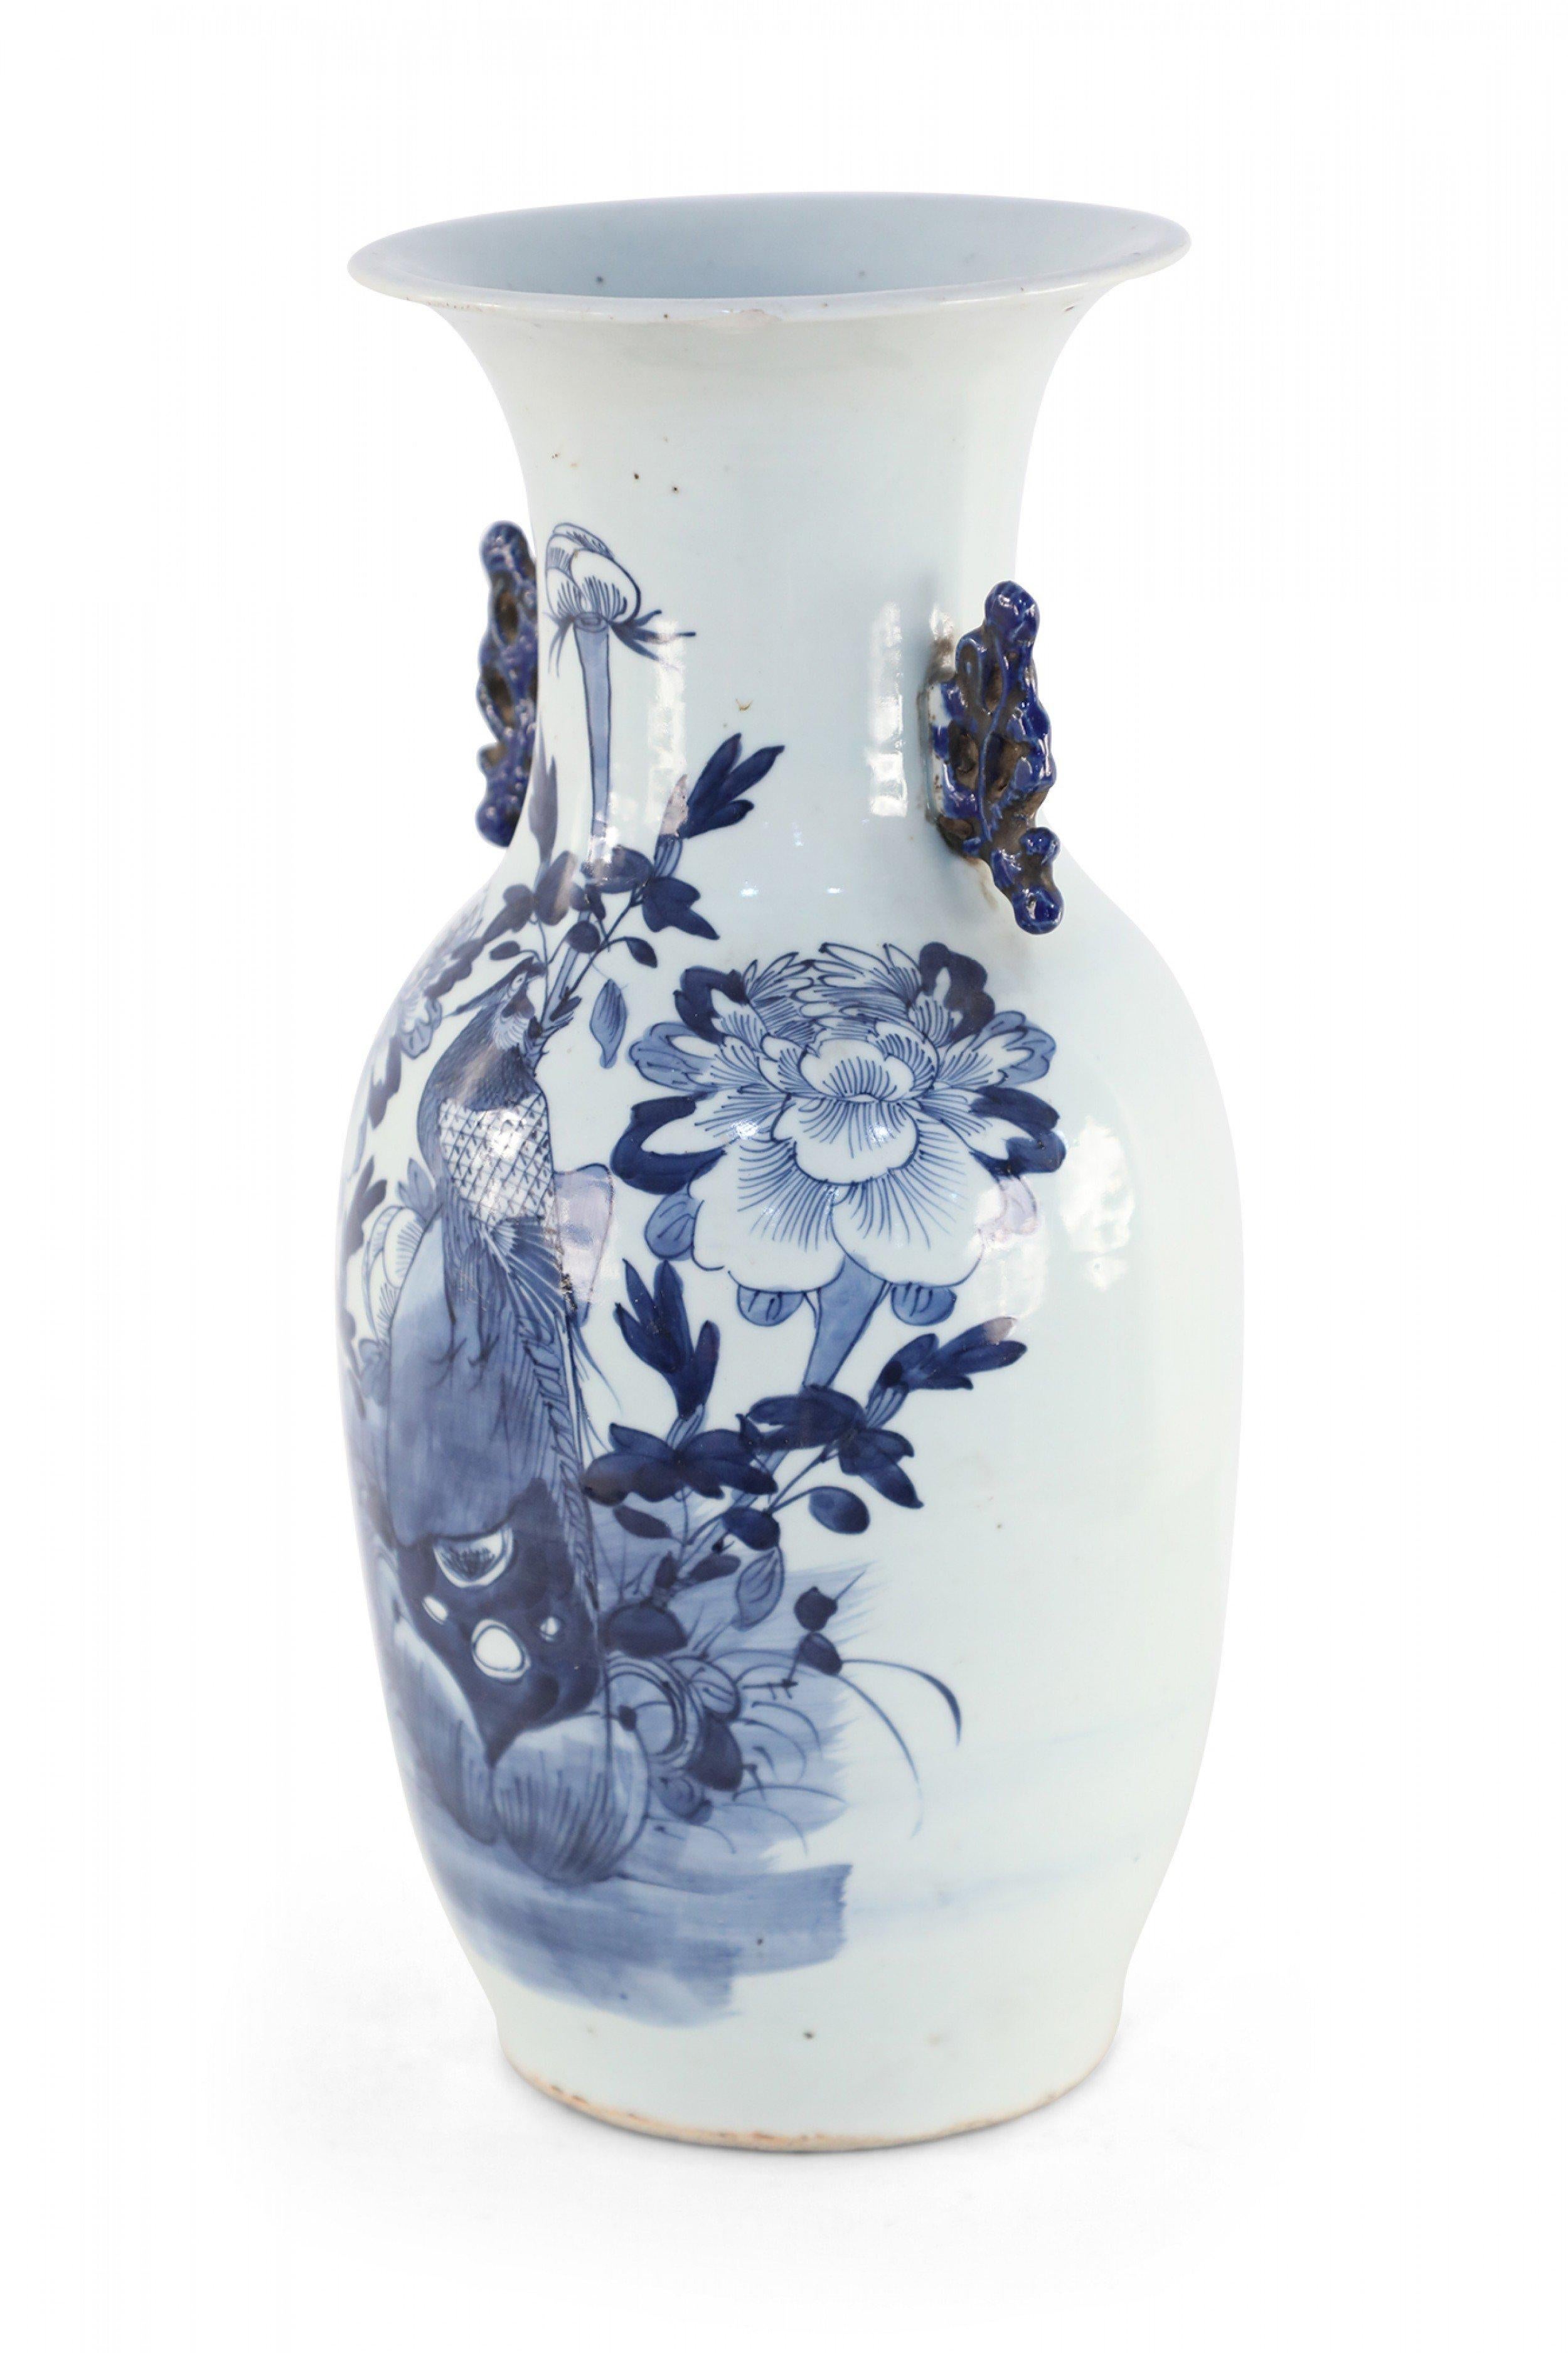 Chinese White and Blue Garden and Bird Design Porcelain Urn For Sale 1